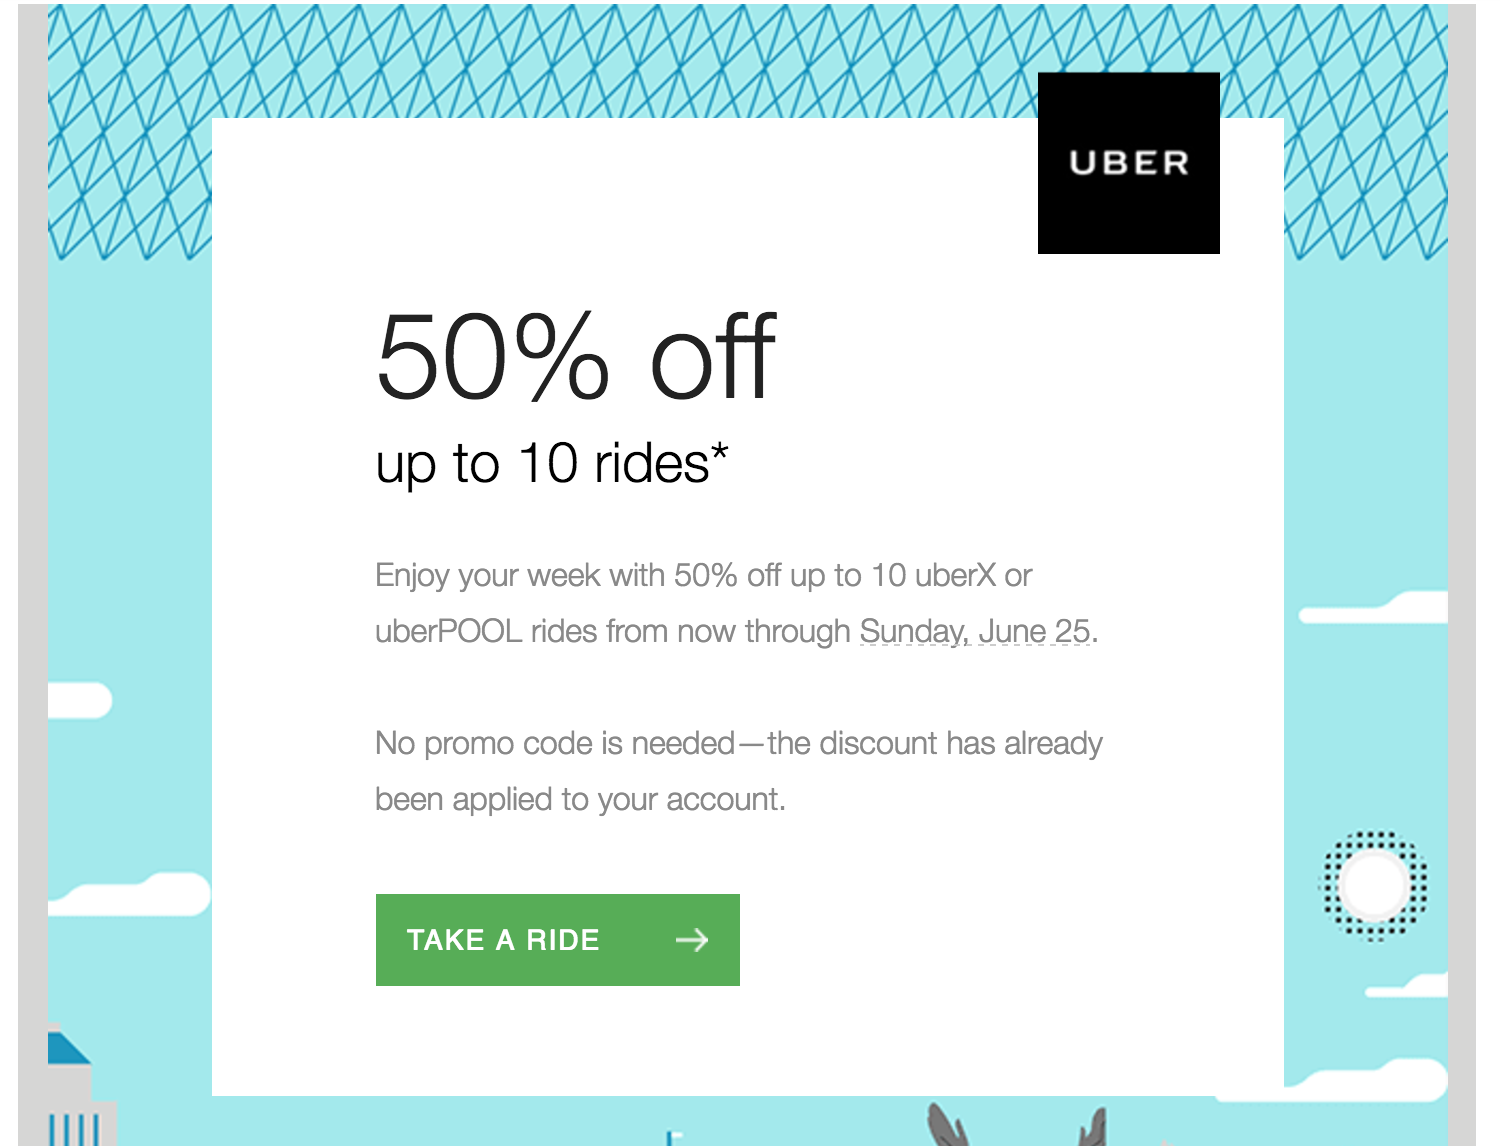 Uber Promotion 50 Off Up to 10 Rides Through June 25 [Update 2017.06.